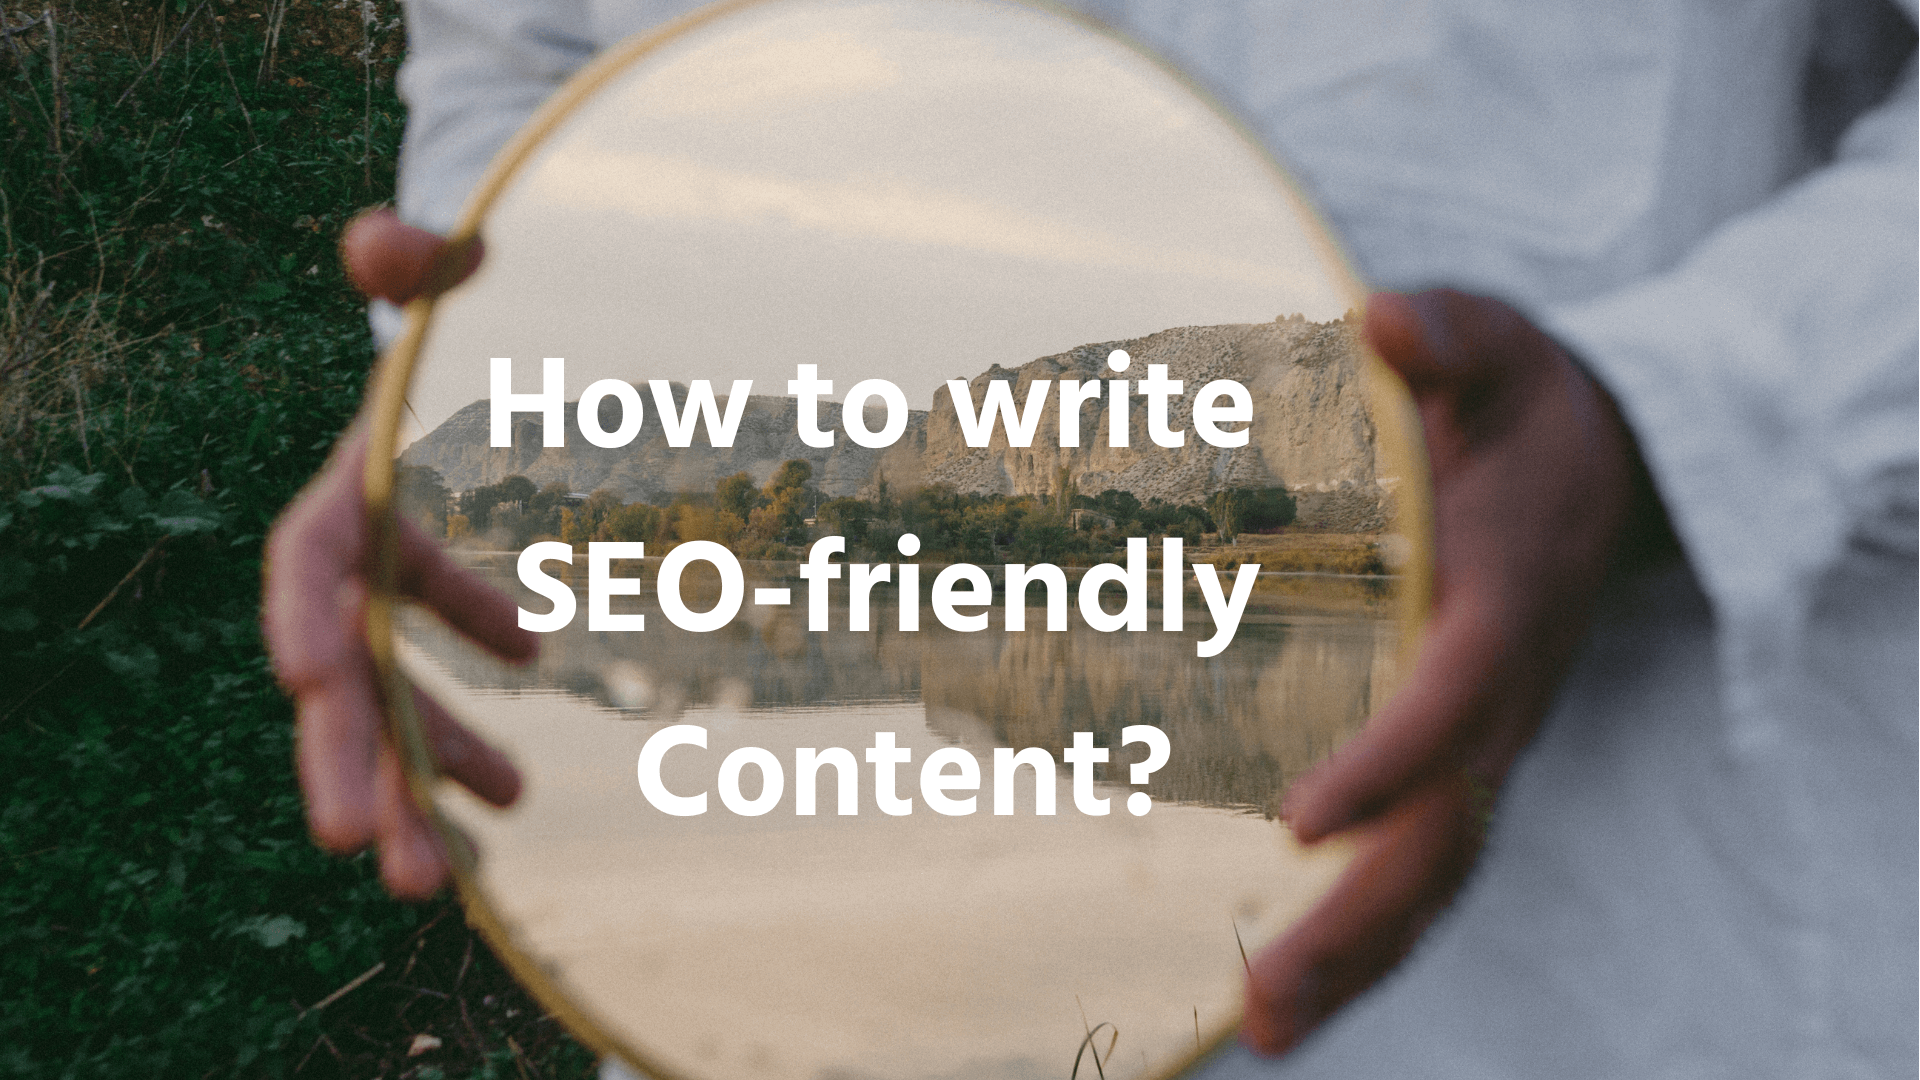 How to write SEO-friendly Content?